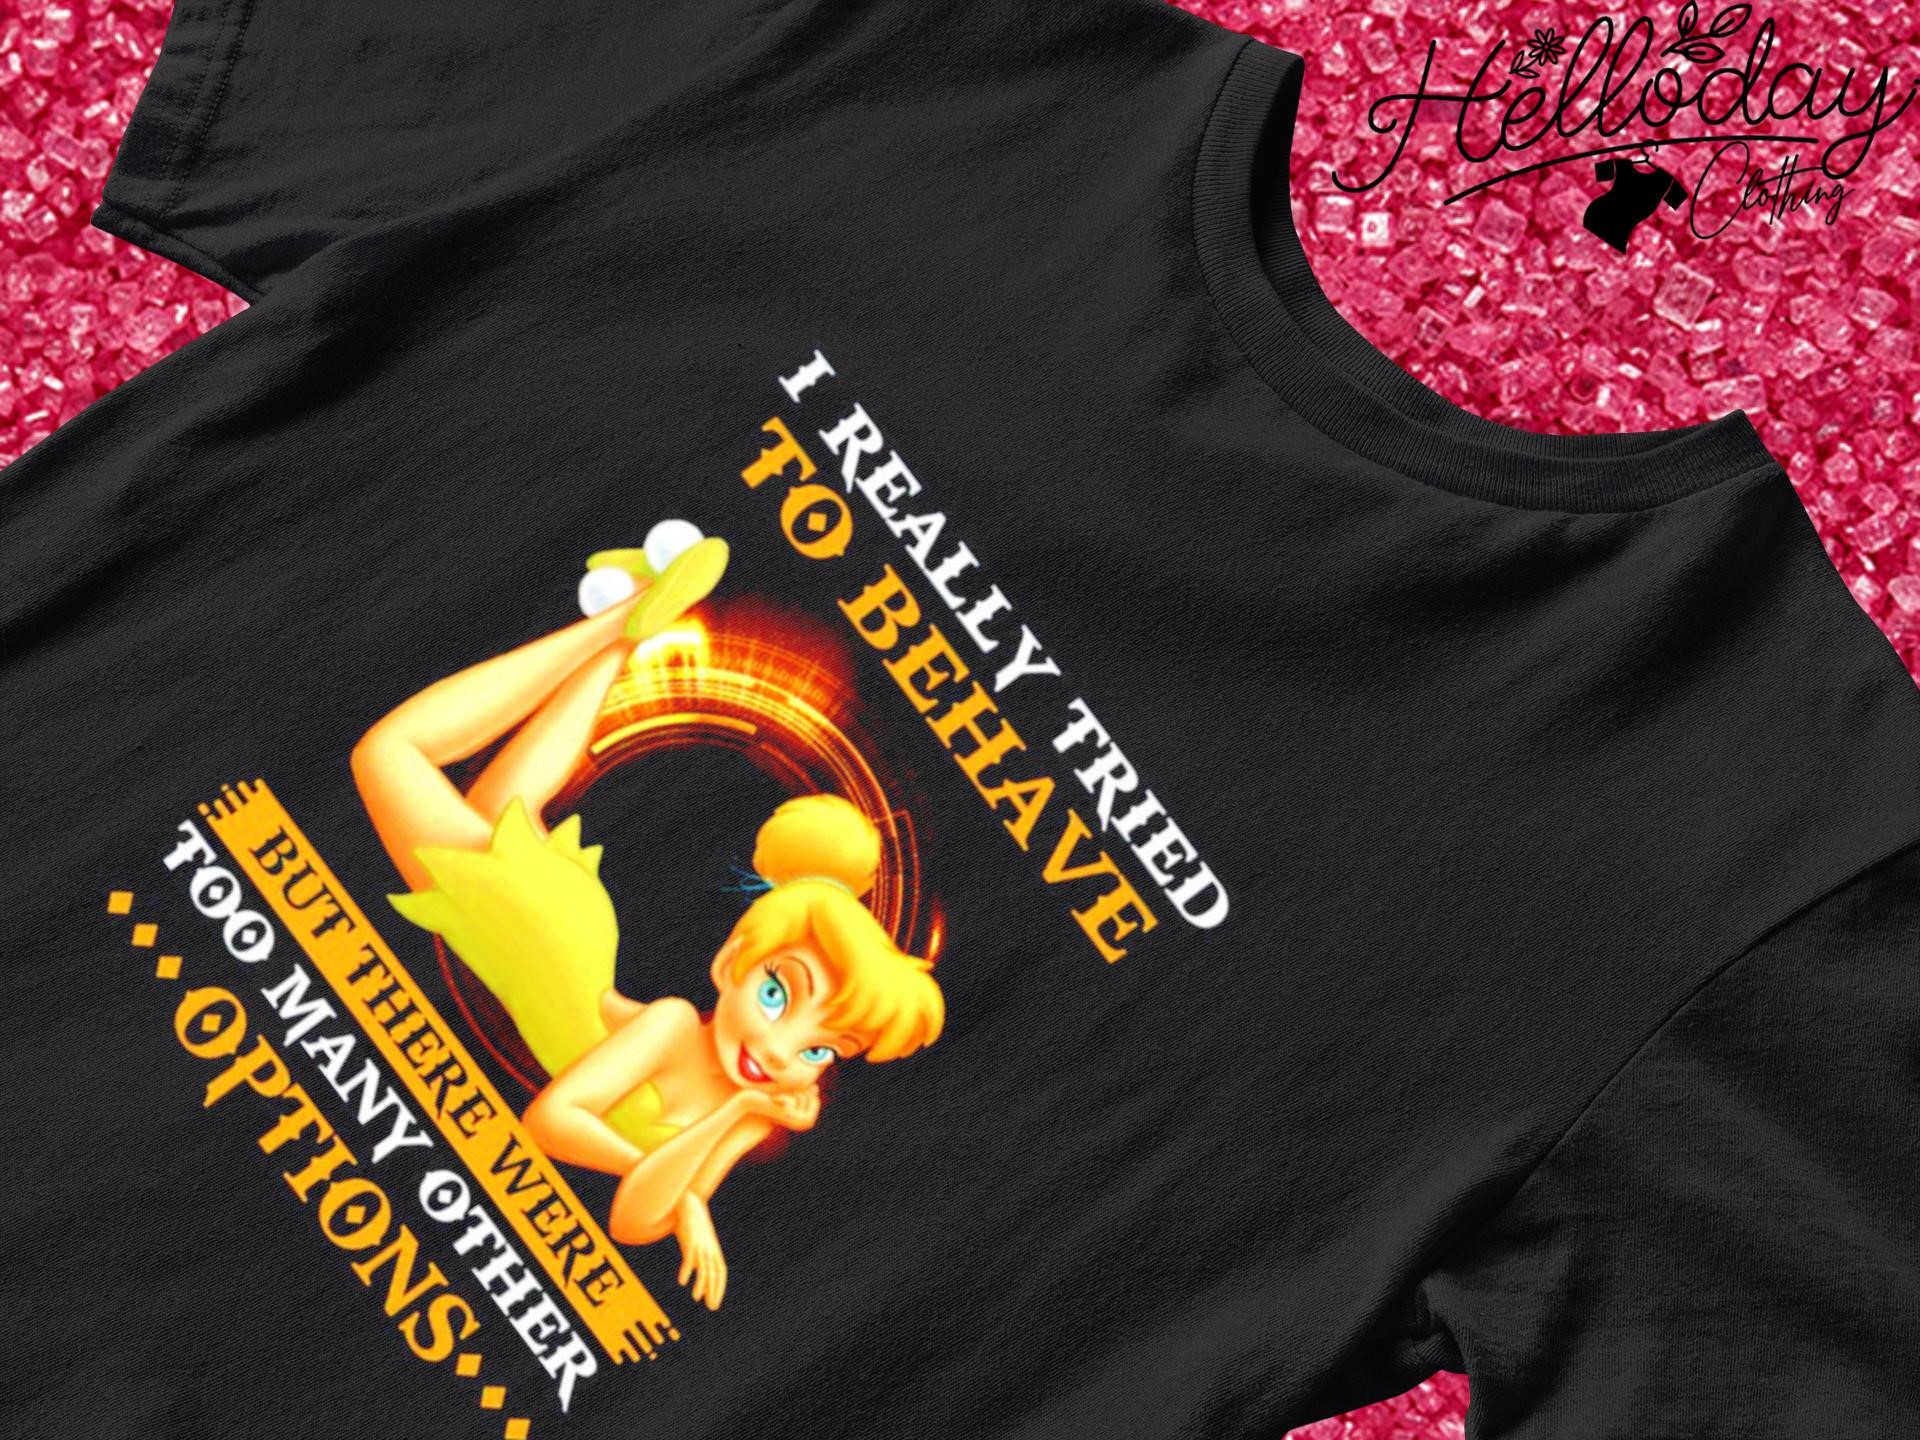 Tinker Bell I really tried to behave but there were options shirt